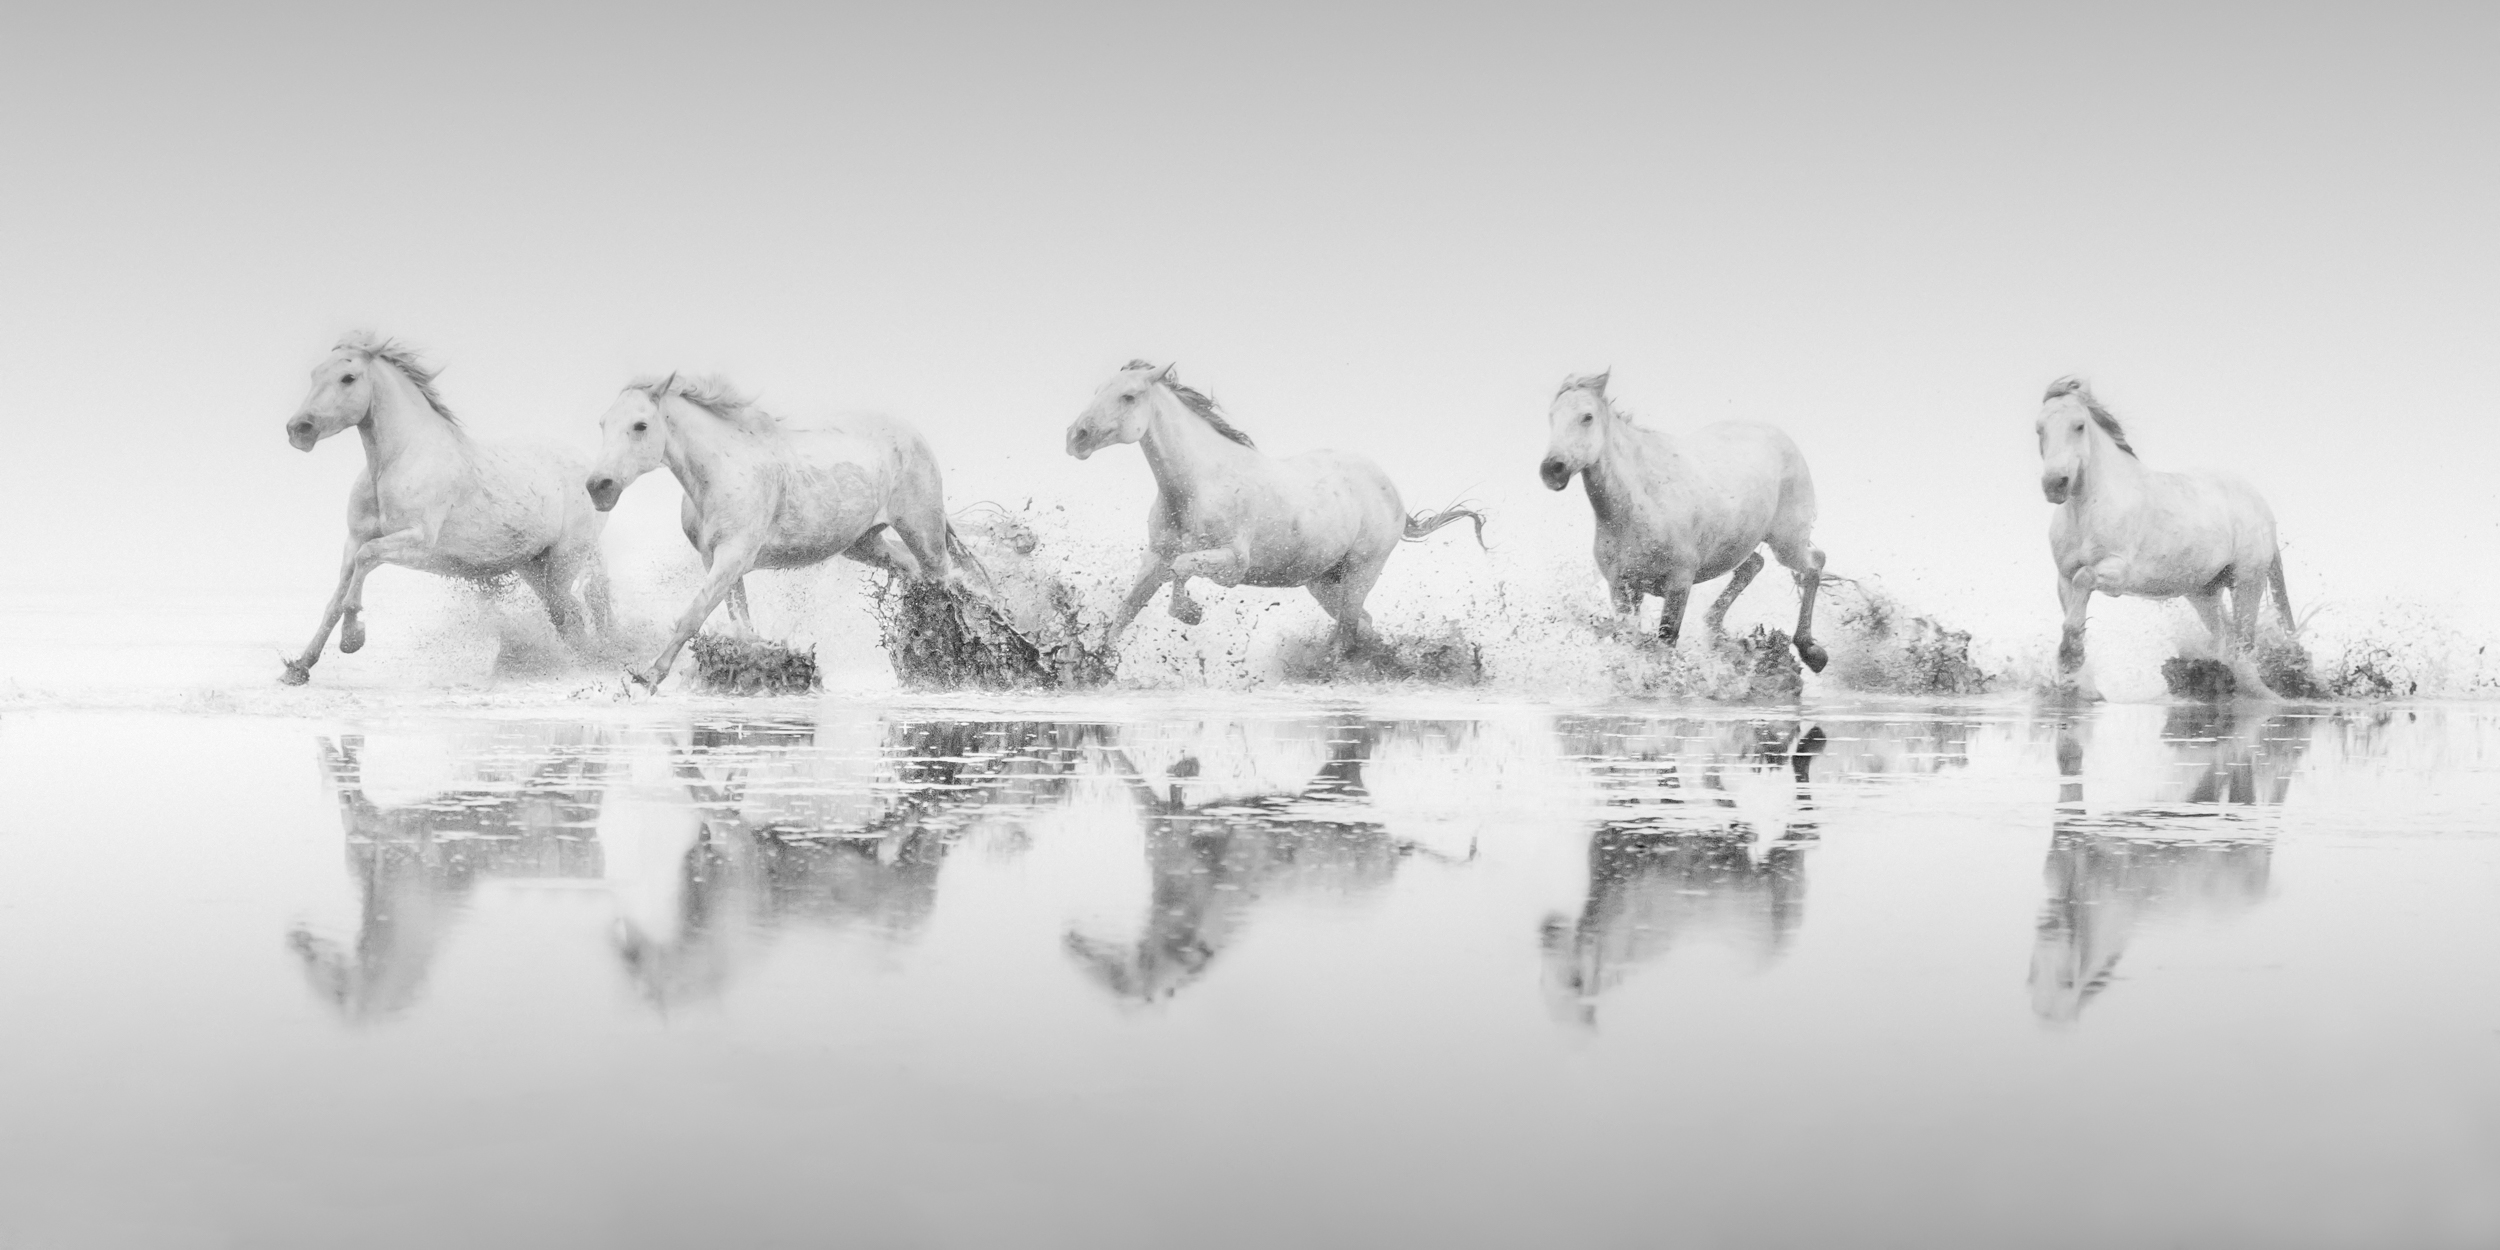 Reflections of the Camargue II